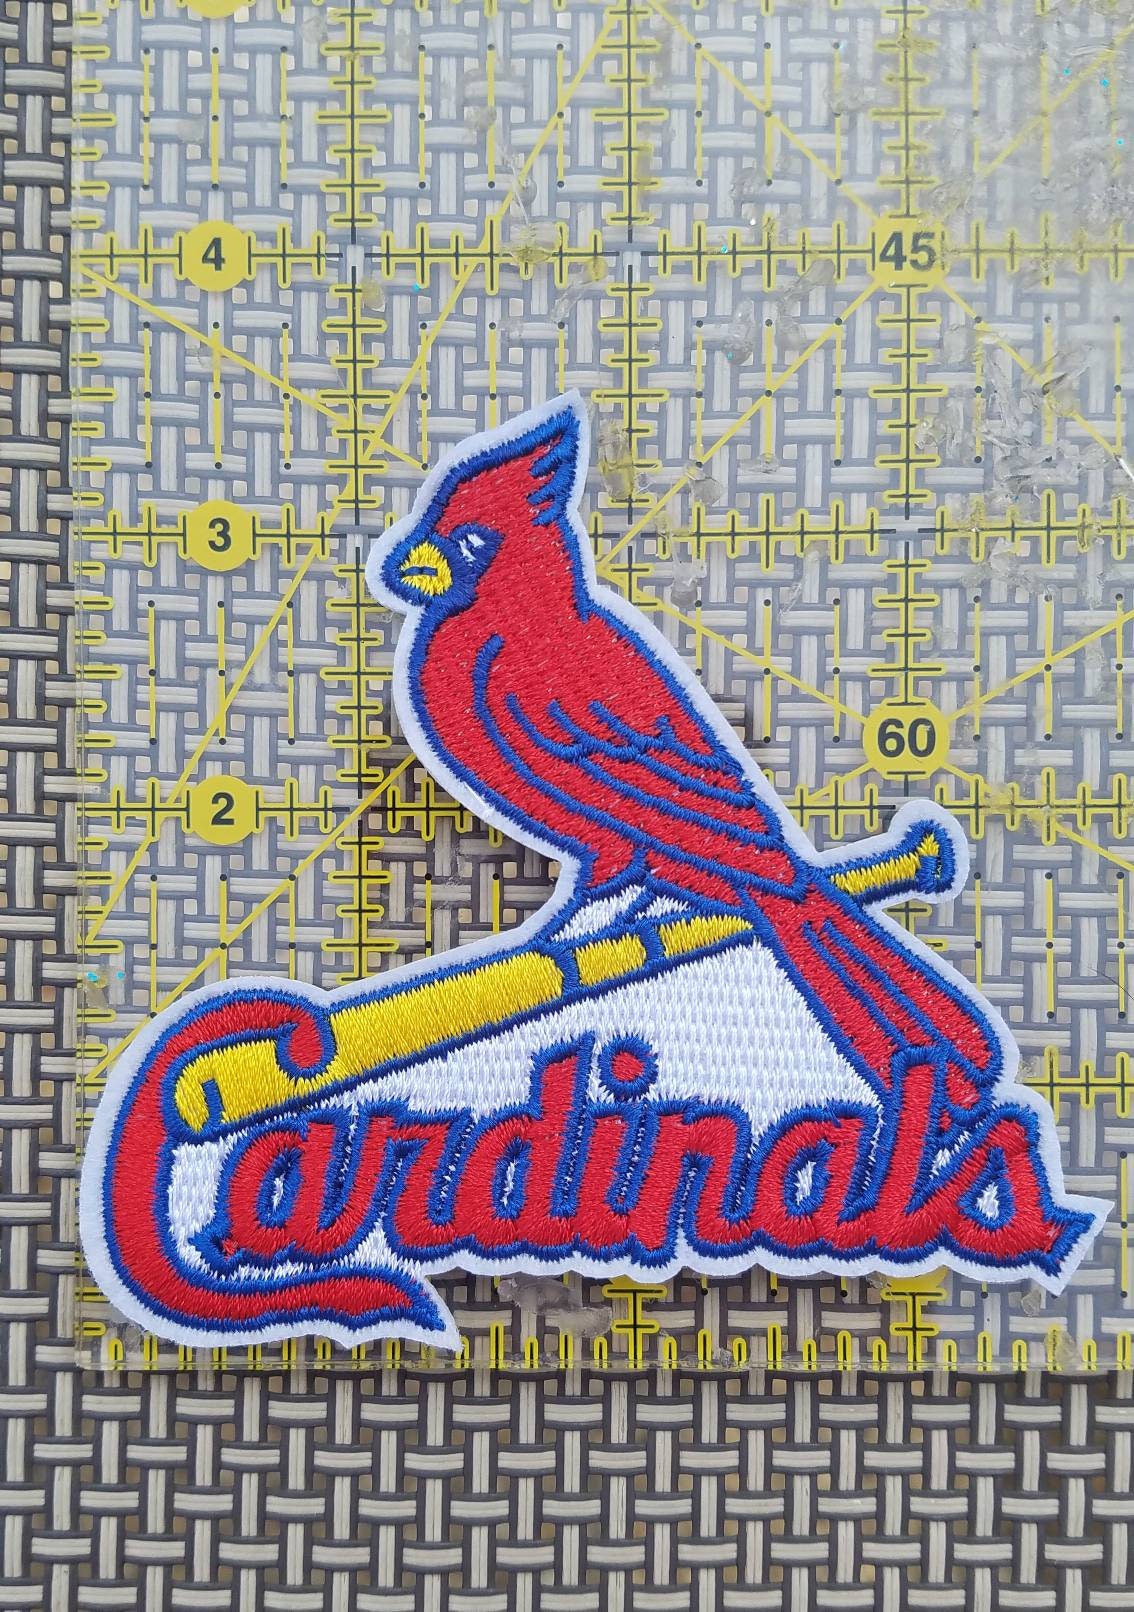 St Louis Cardinals - Patch - Back Patches - Patch Keychains Stickers -   - Biggest Patch Shop worldwide